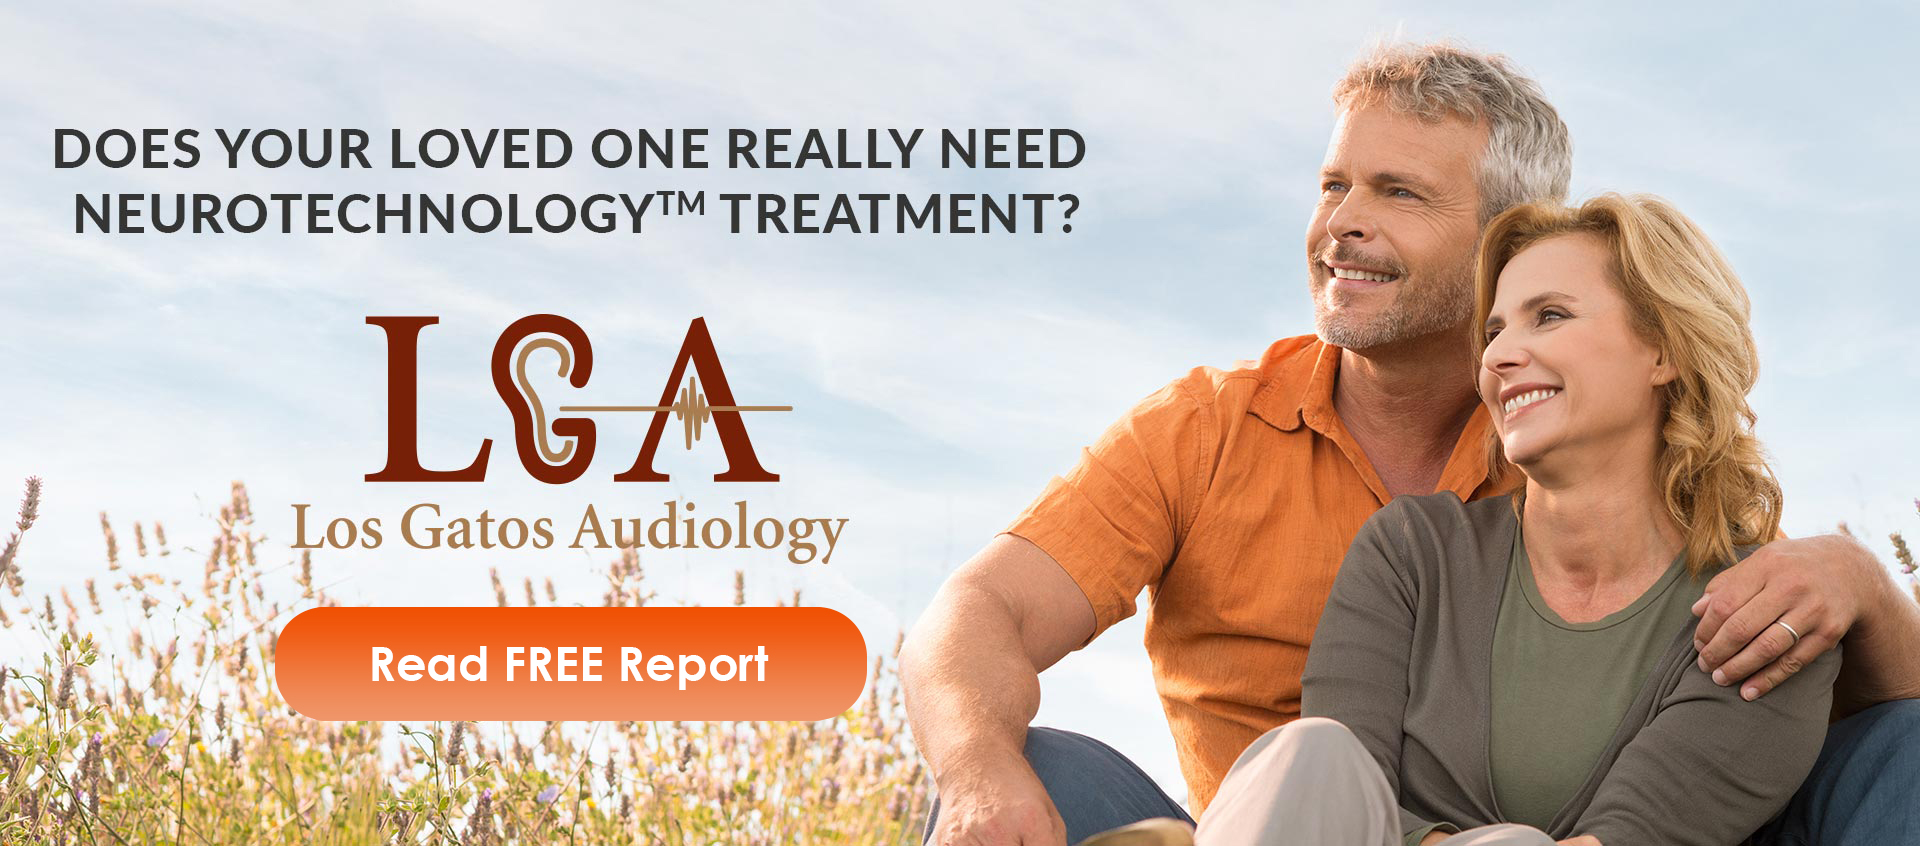 hearing aids for your spouse